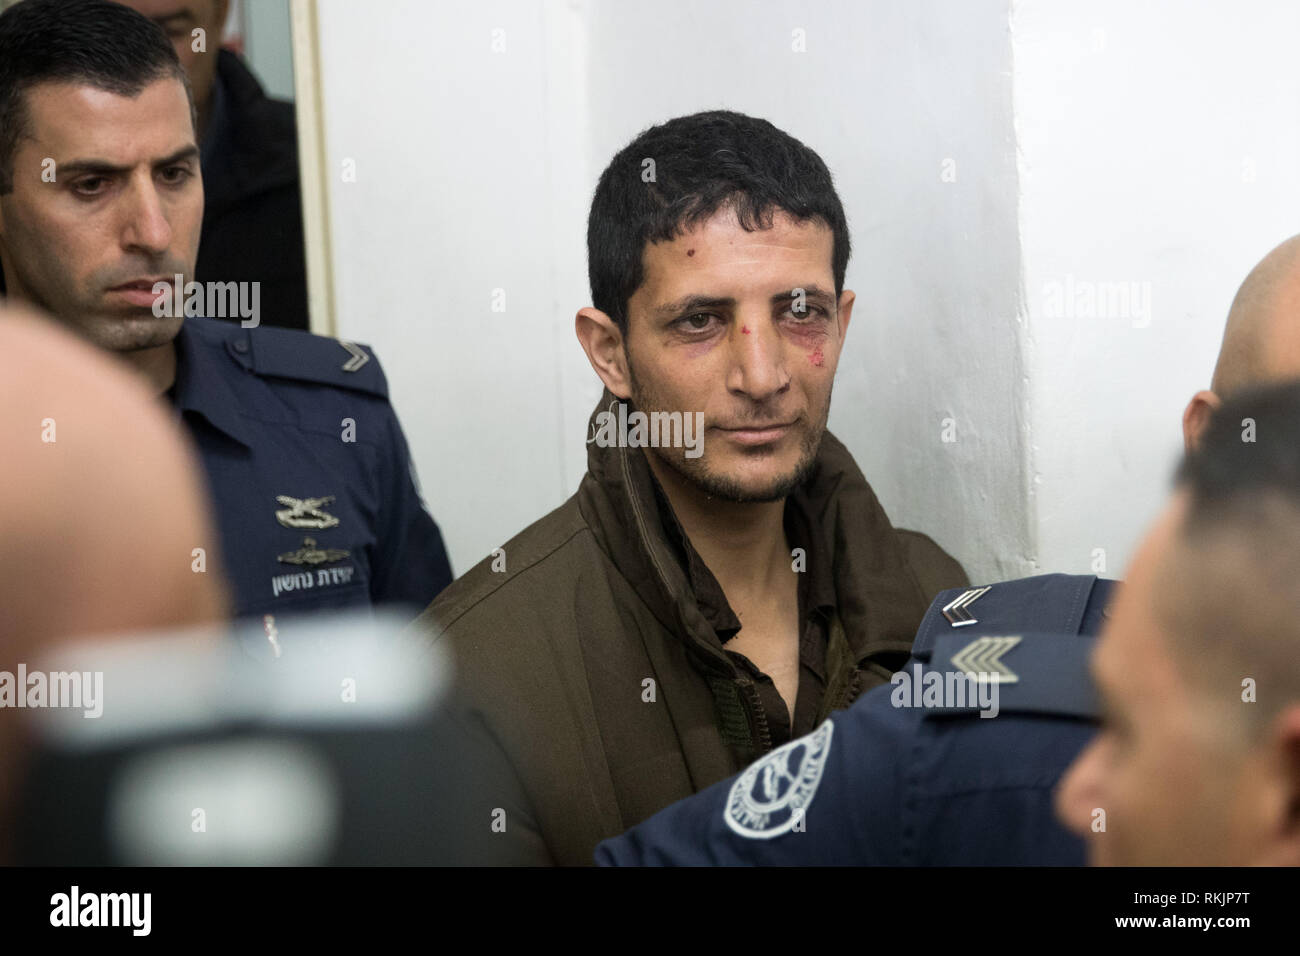 Jerusalem. 11th Feb, 2019. Arafat Irfayia (C) appears at a courtroom in Jerusalem, on Feb. 11, 2019. Israel's Shin Bet security service said on Sunday that the killing of a young Israeli woman last week was a 'terrorist attack' carried out by Arafat Irfayia. The Shin Bet said that the interrogation of Arafat Irfayia, arrested on Friday in the West Bank city of Ramallah, showed the killing was nationalistically-motivated. Credit: JINI/Xinhua/Alamy Live News Stock Photo